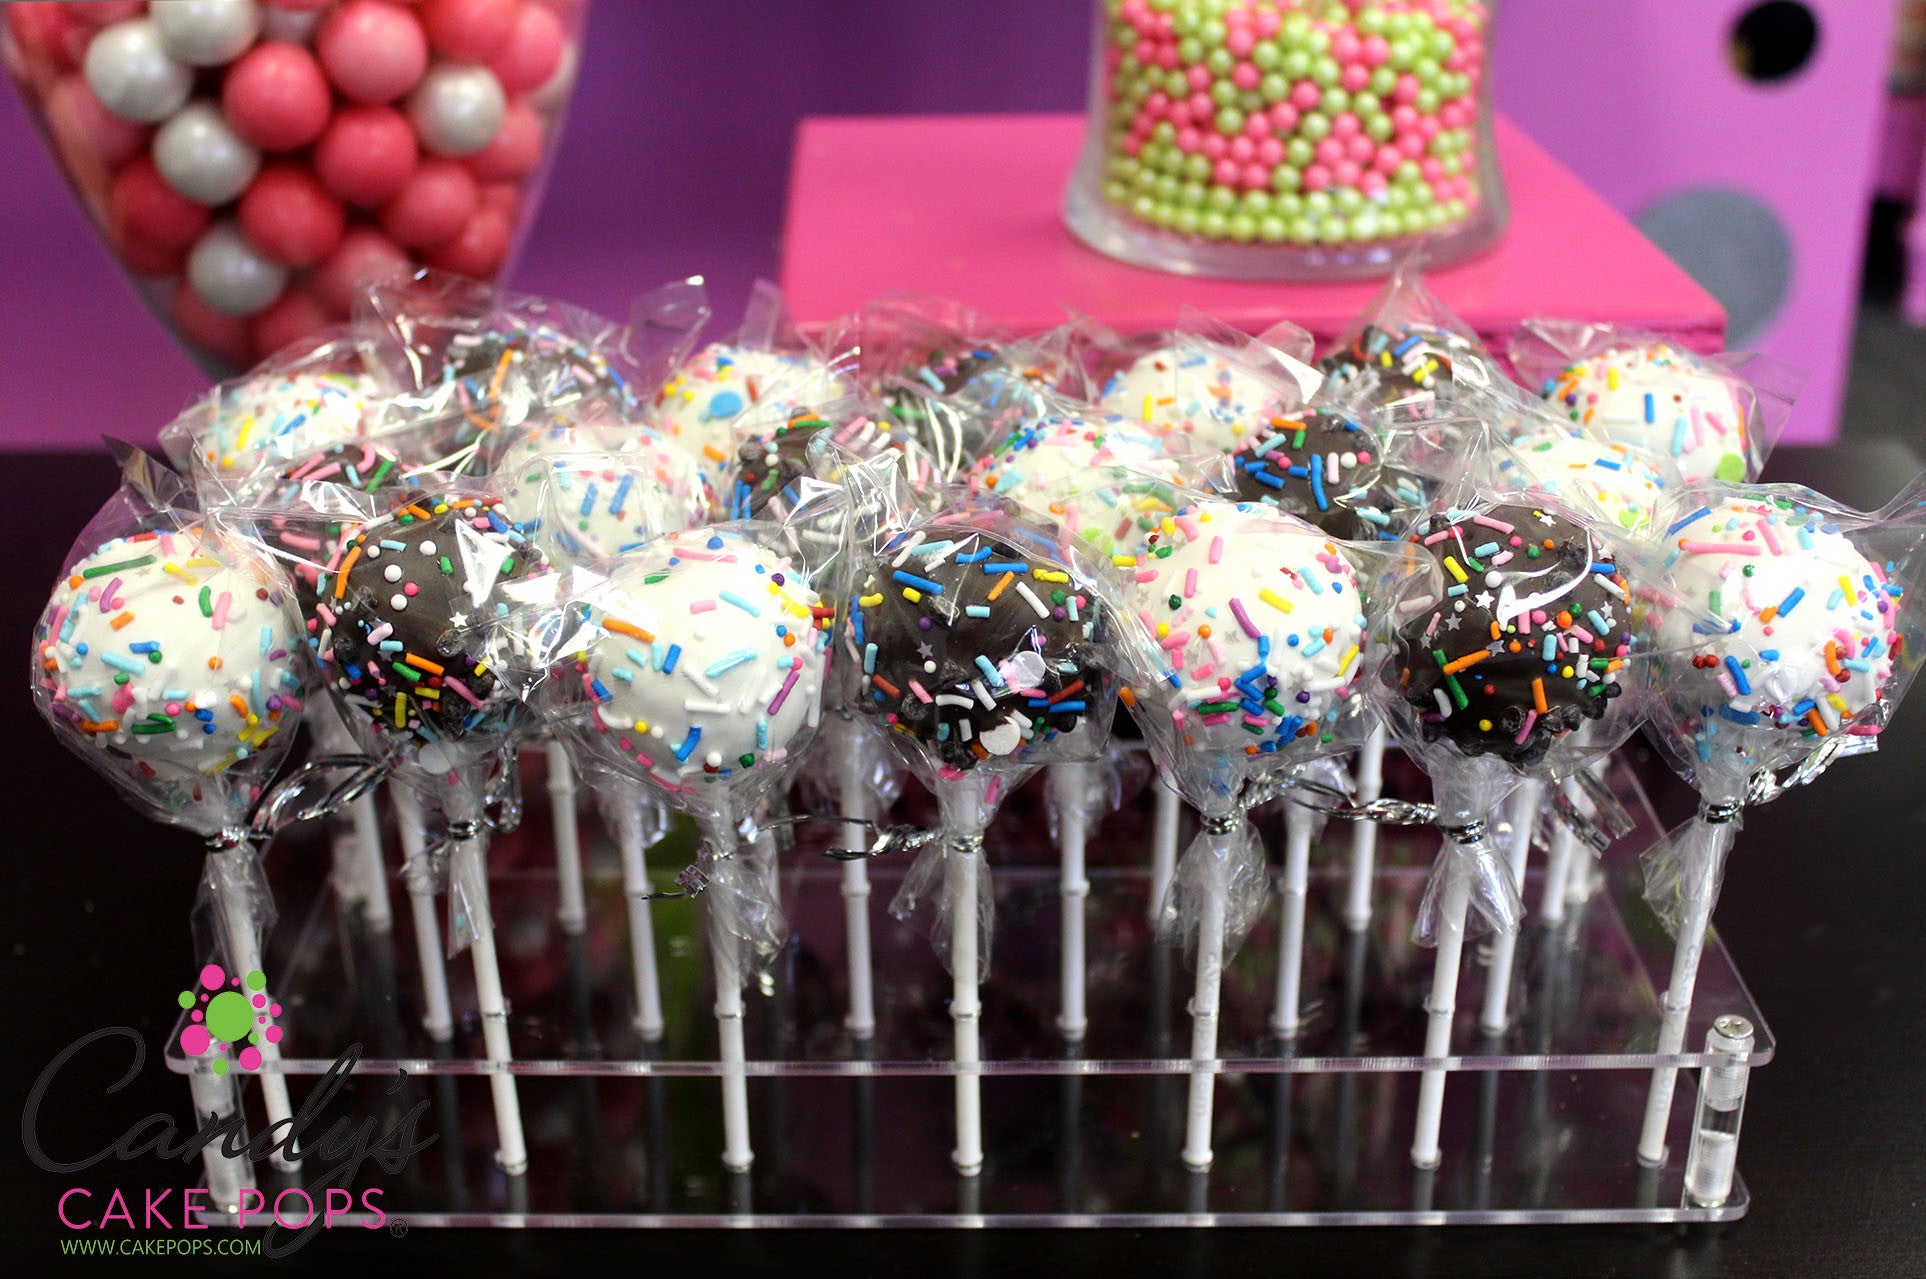 Acrylic Cake Pop Stand - Holds 20 Cake Pops (Cake Pops Not Included) - Candy's Cake Pops